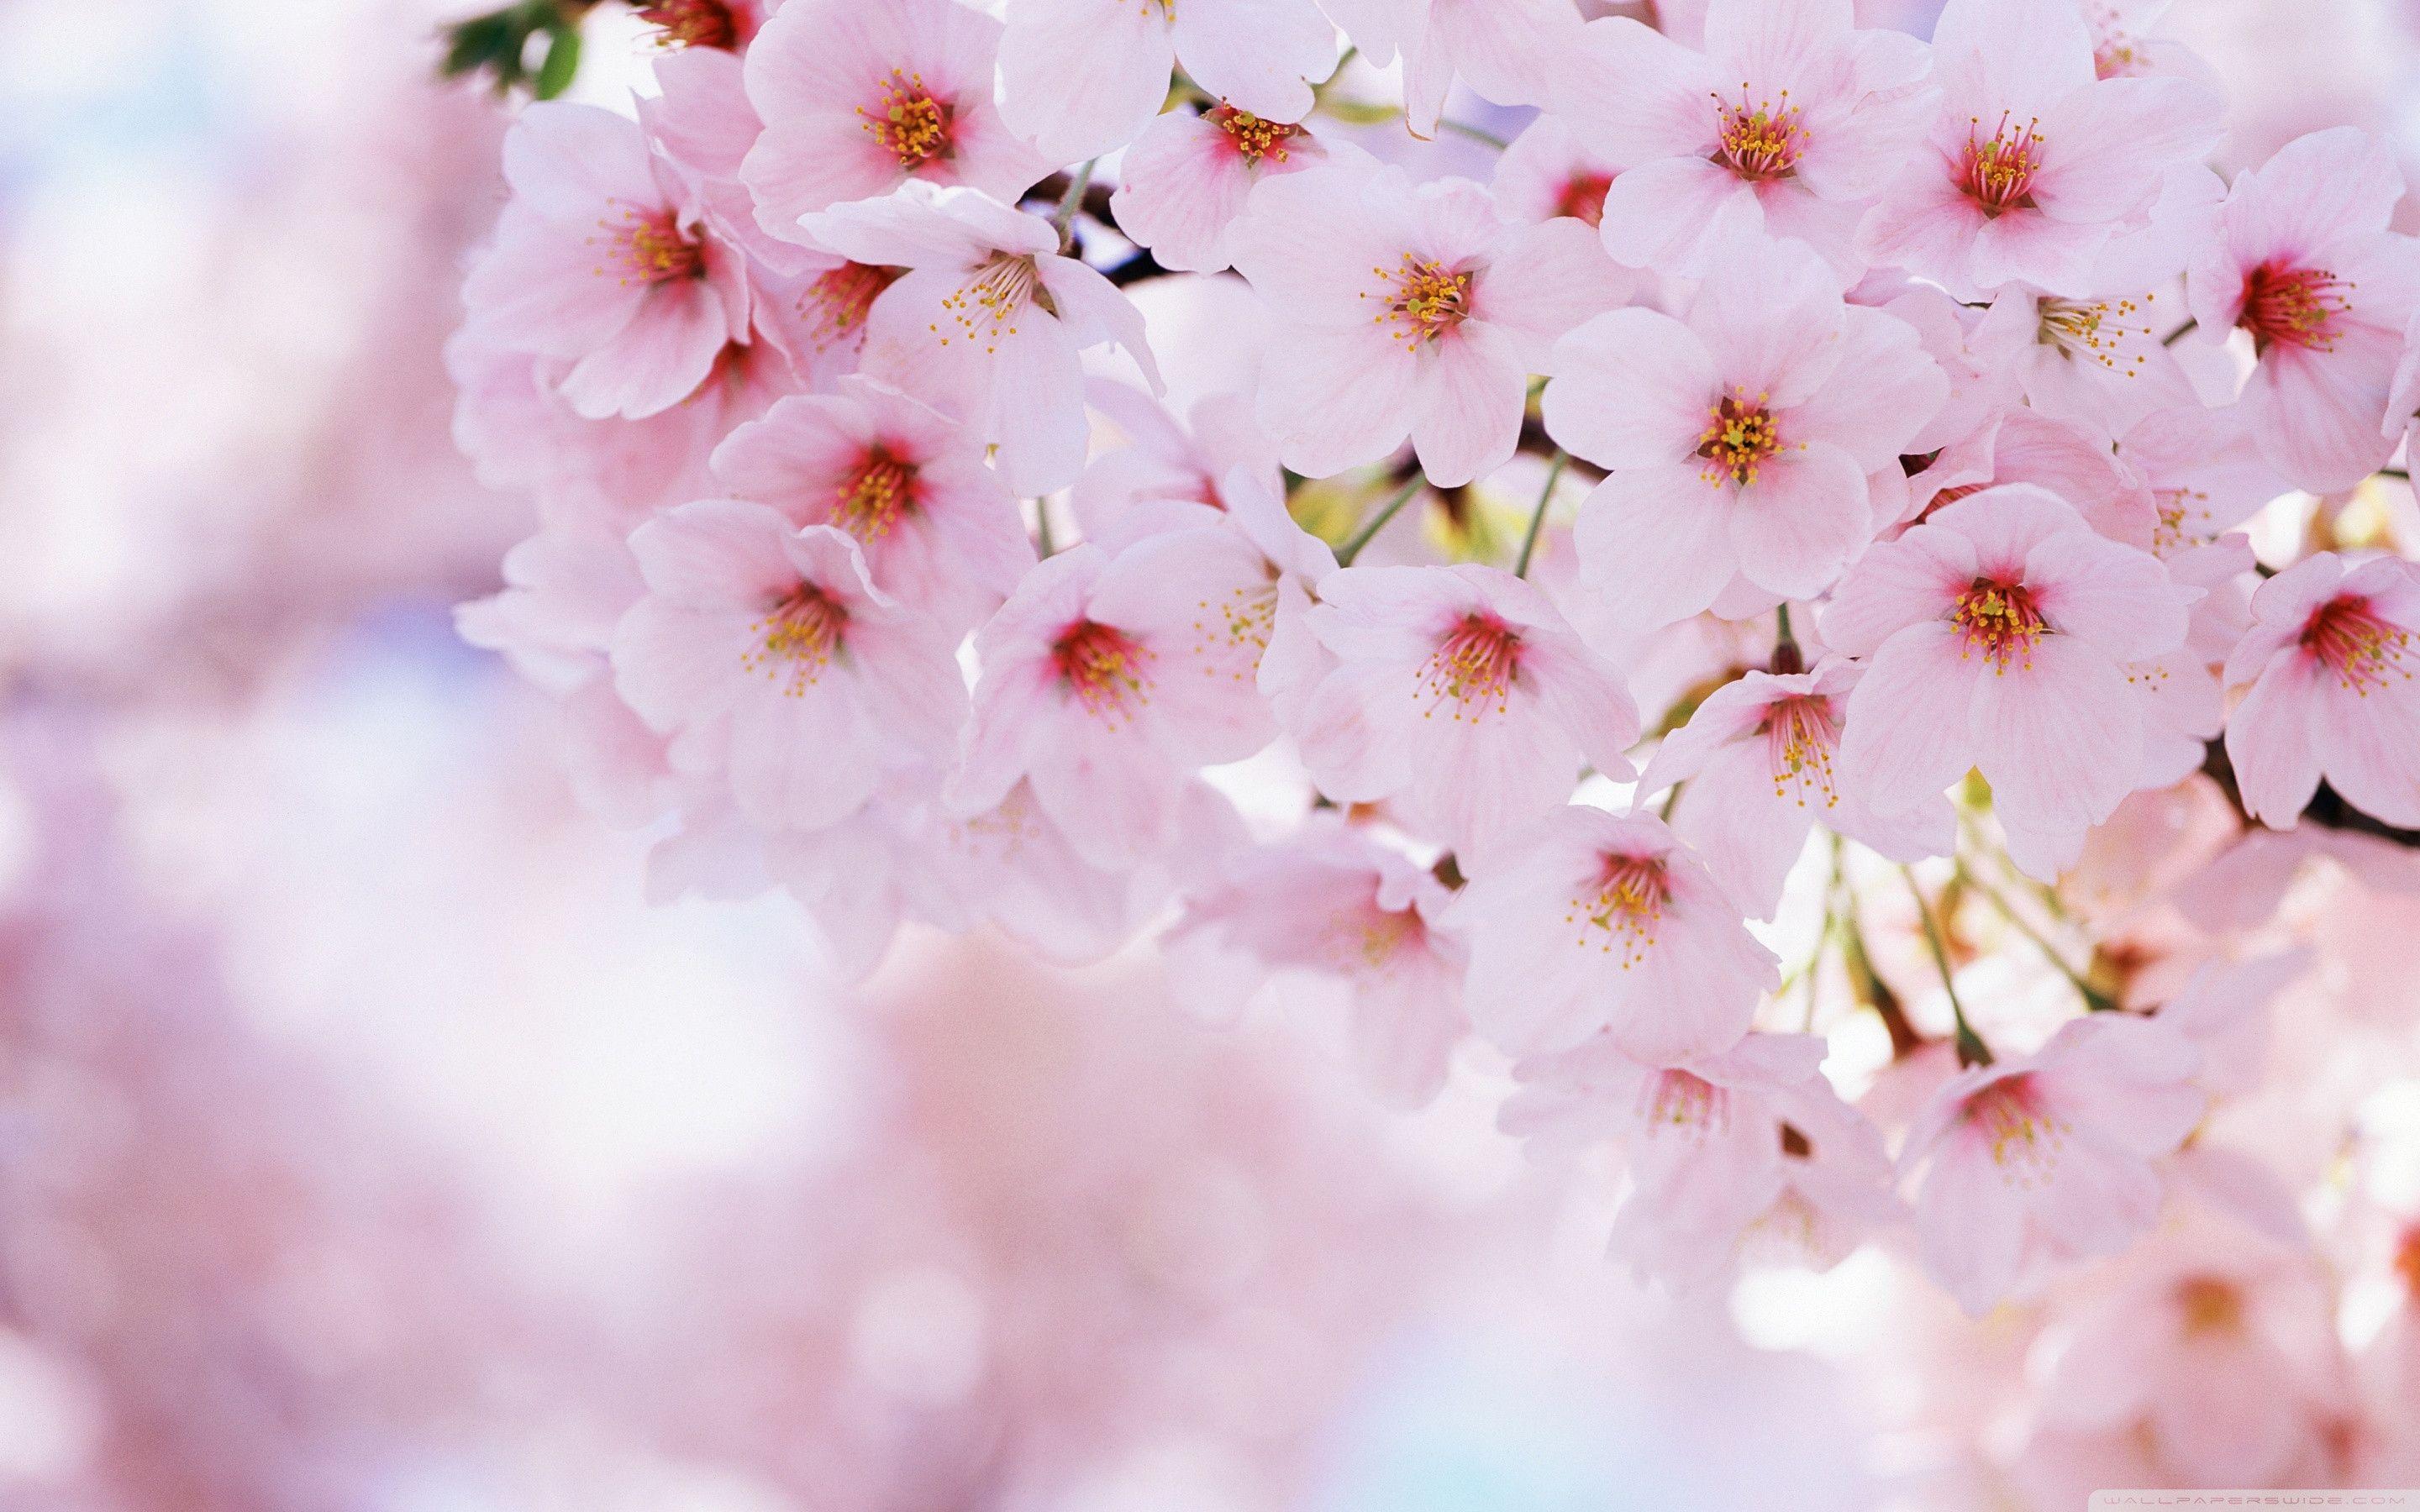 Cherry Blossoms Flowers Wallpaper Free Cherry Blossoms Flowers Background